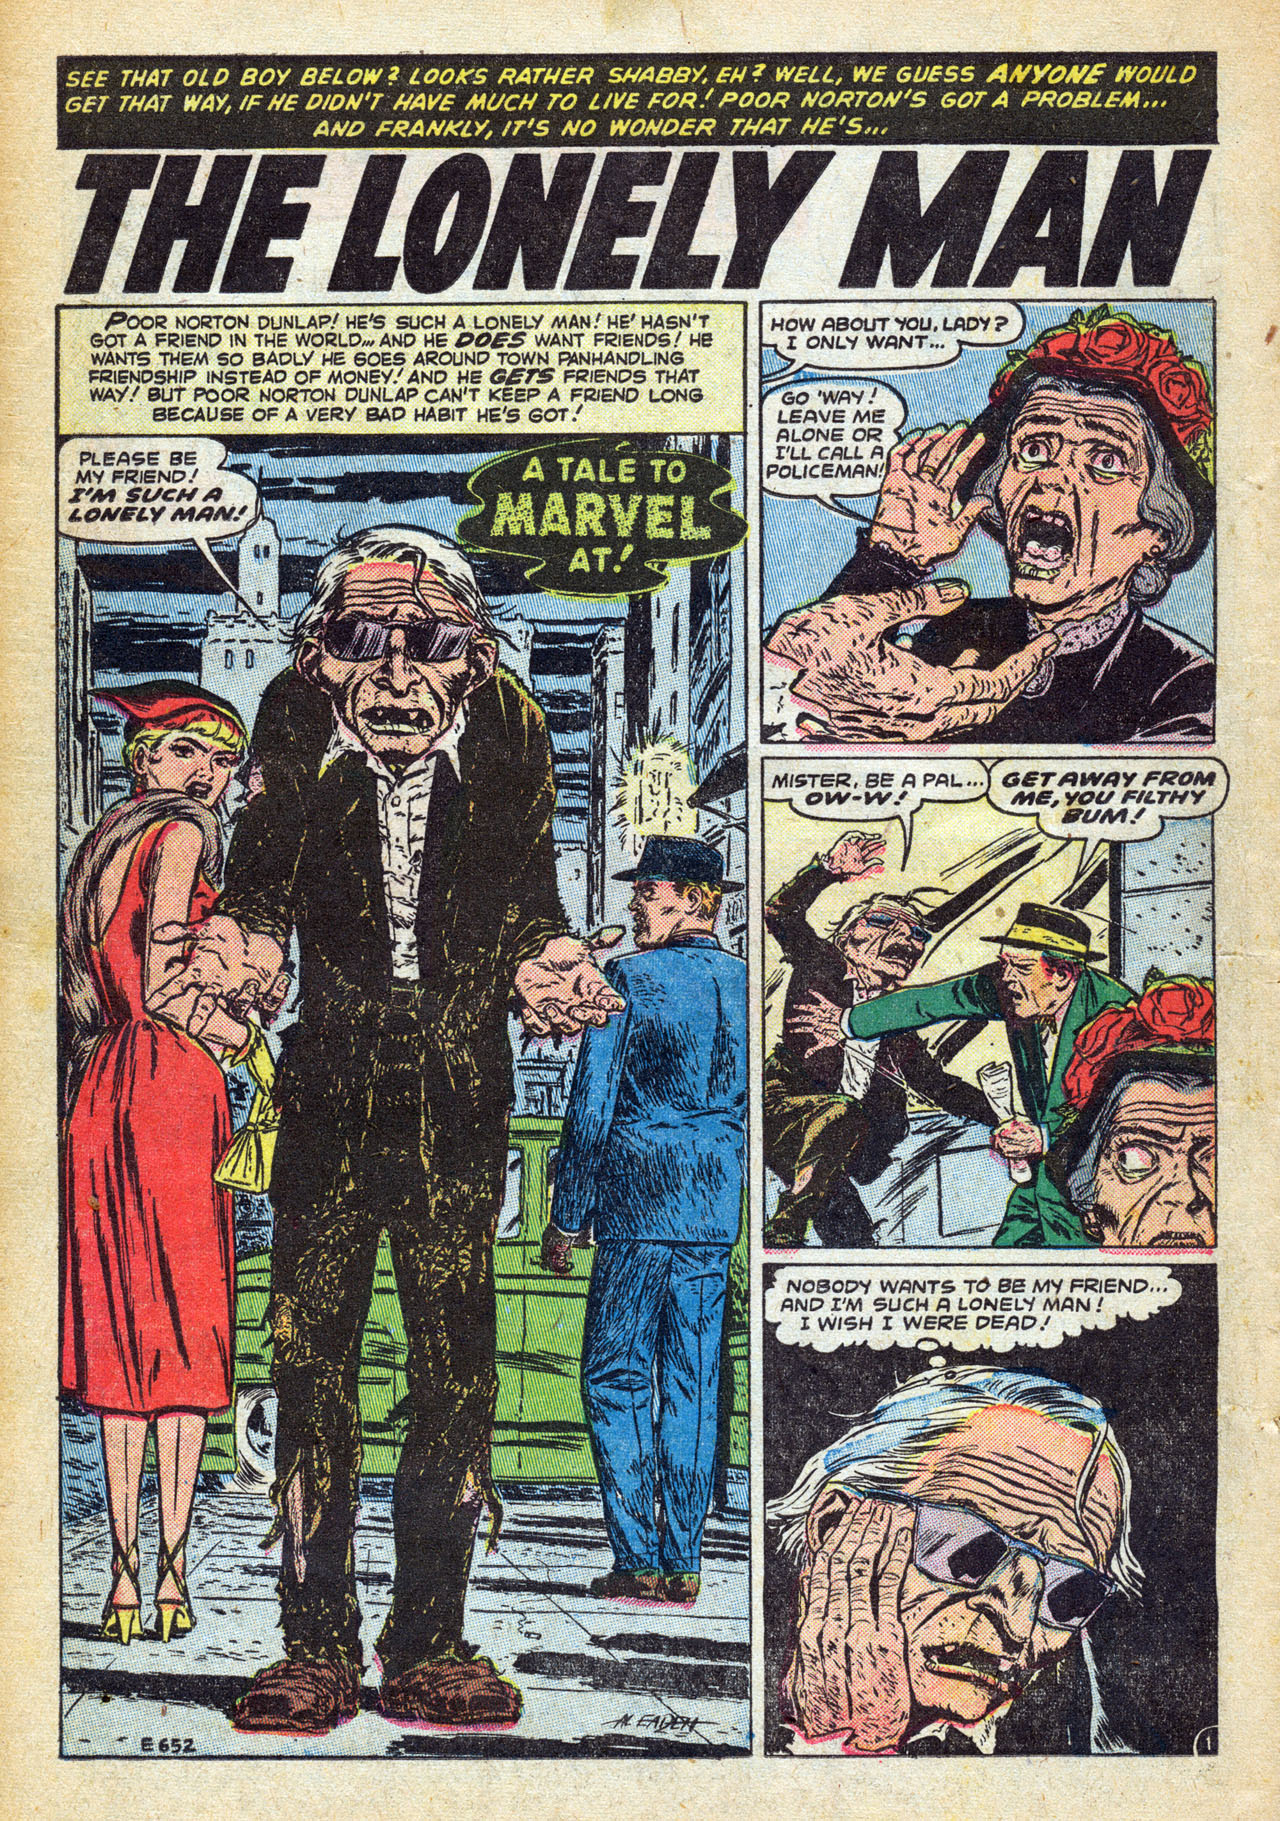 Marvel Tales 1949 Issue 126 | Read Marvel Tales 1949 Issue 126 comic online in high quality. Read Full Comic online for free - Read comics online in high quality .